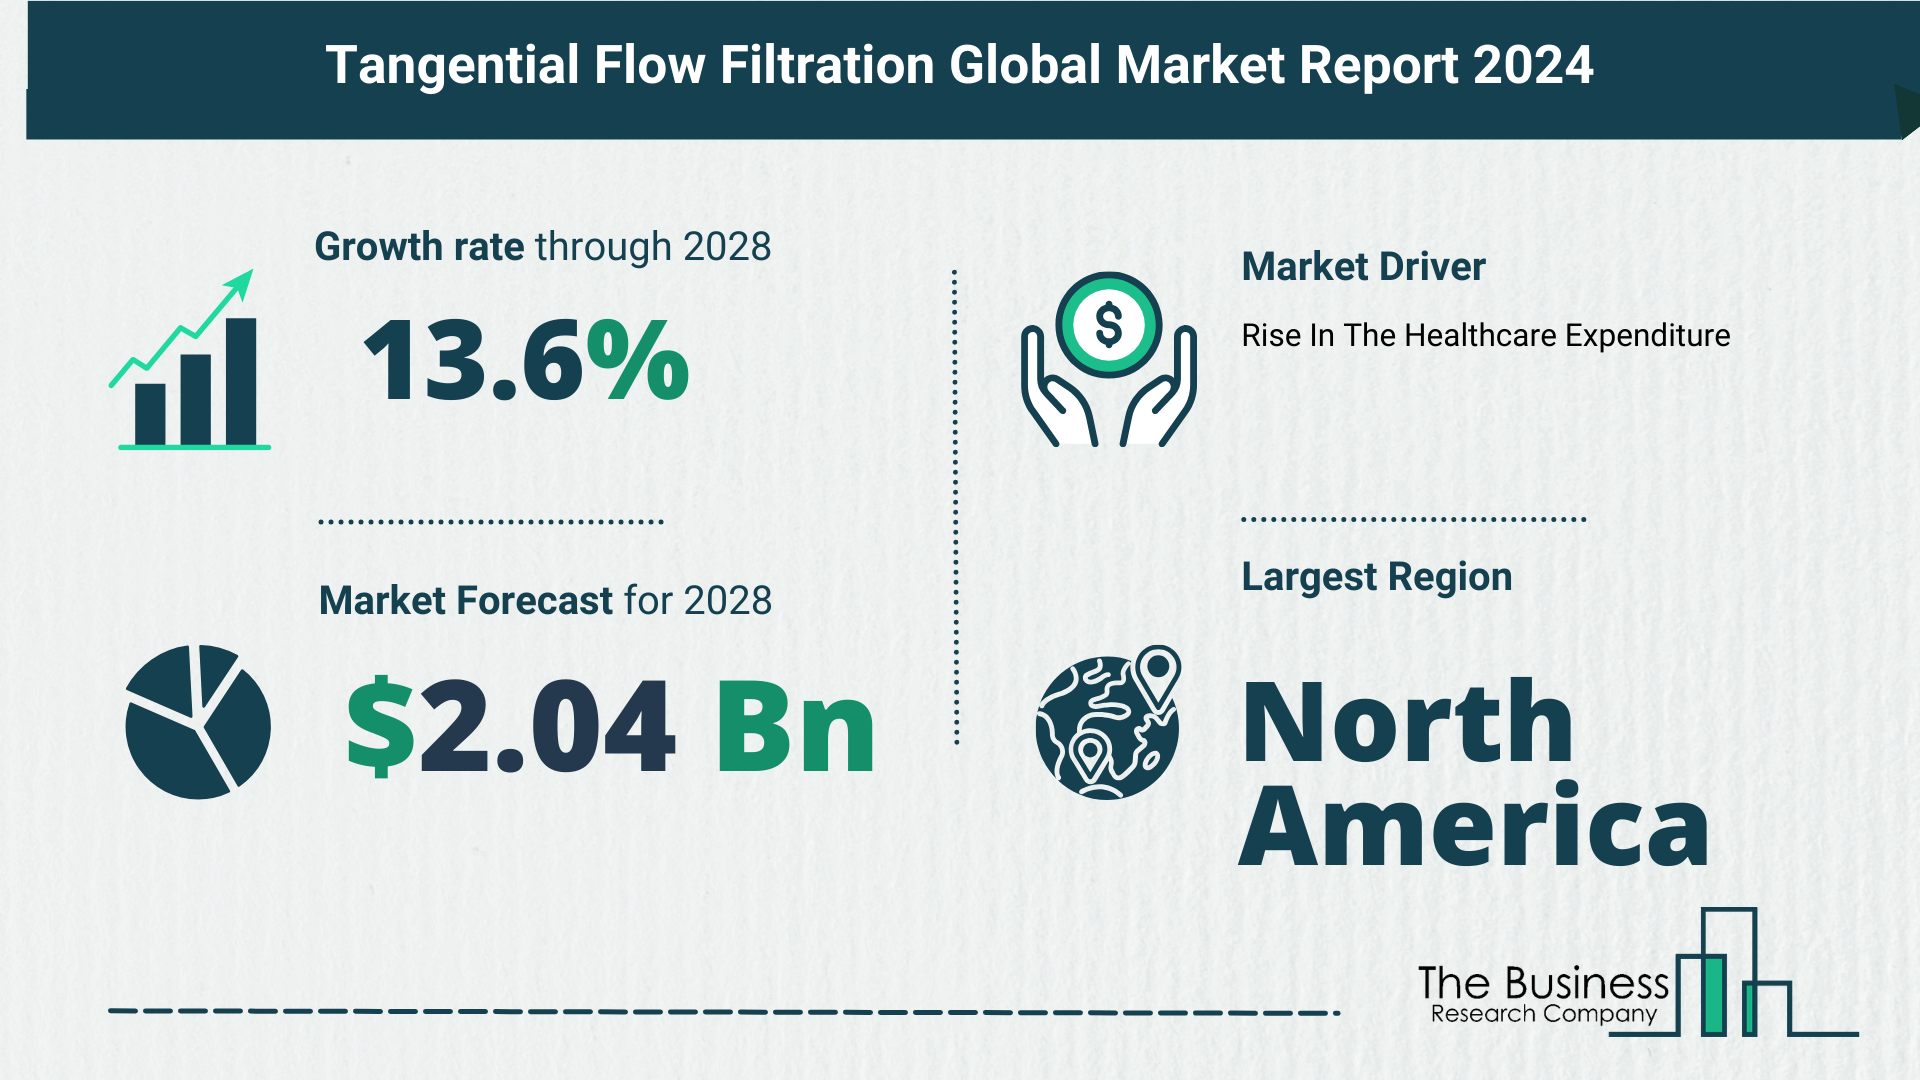 Key Trends And Drivers In The Tangential Flow Filtration Market 2024